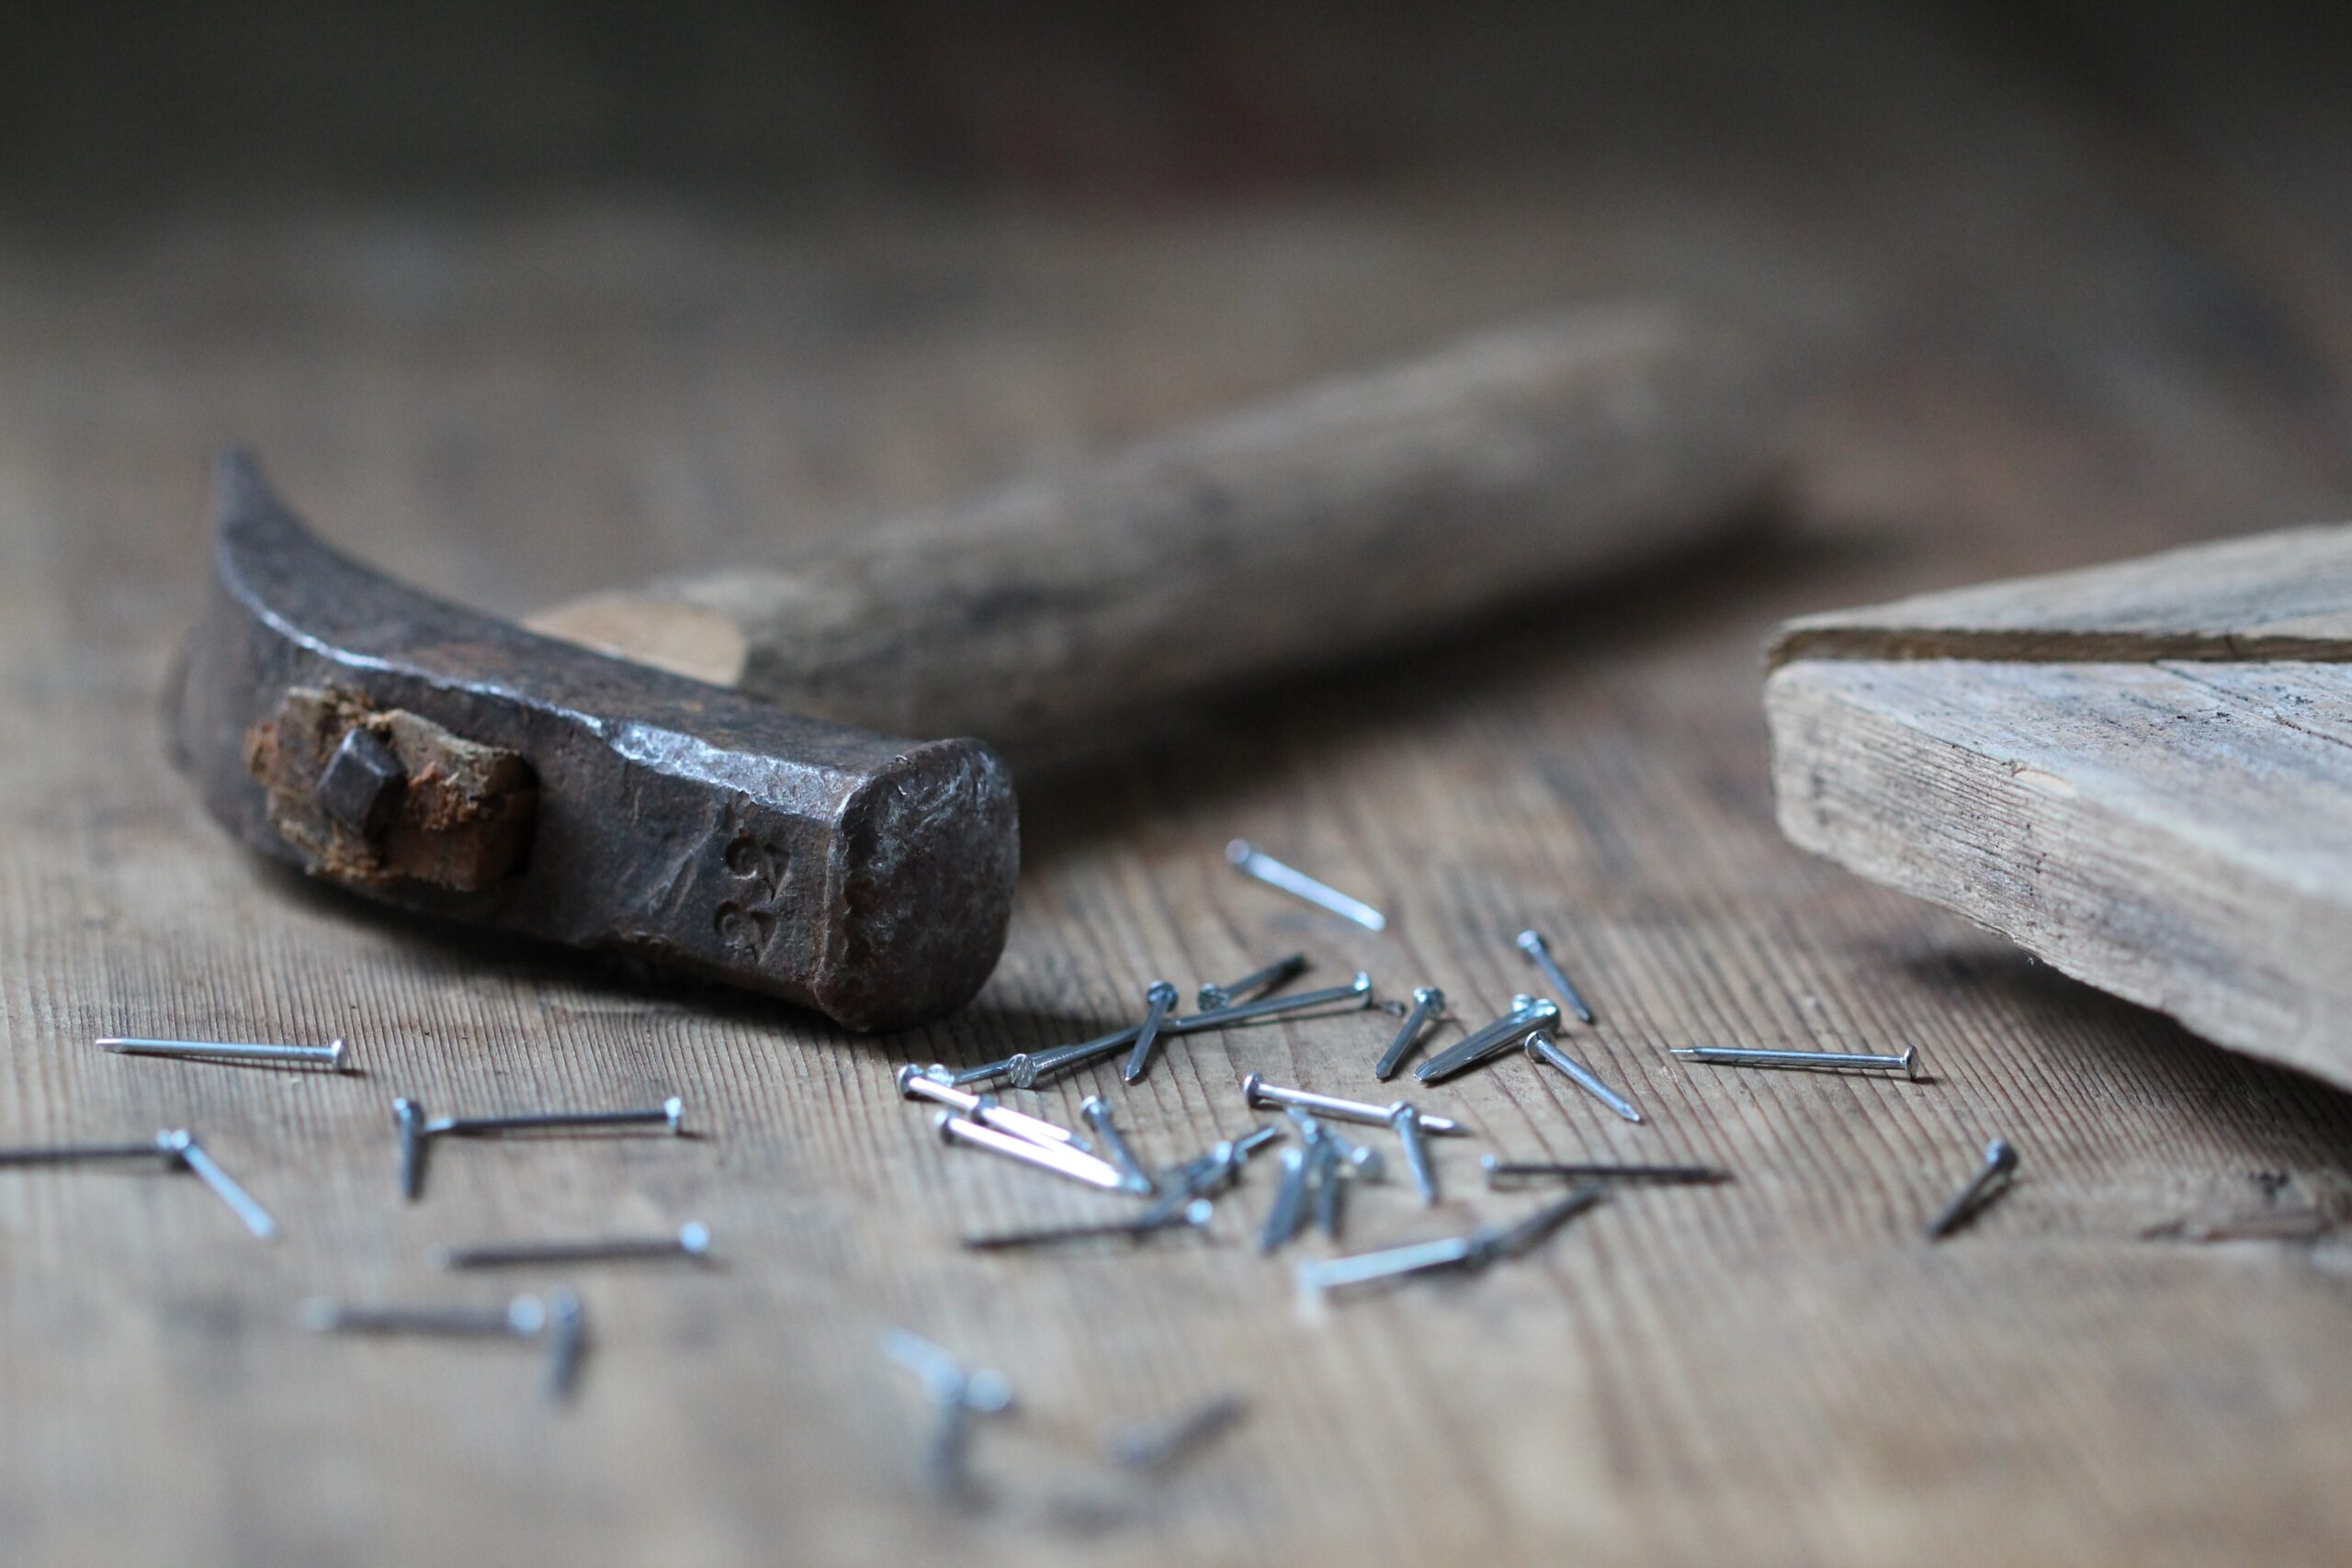 Tetanus: What Is, Causes, Risk Factors, Signs, and Treatment